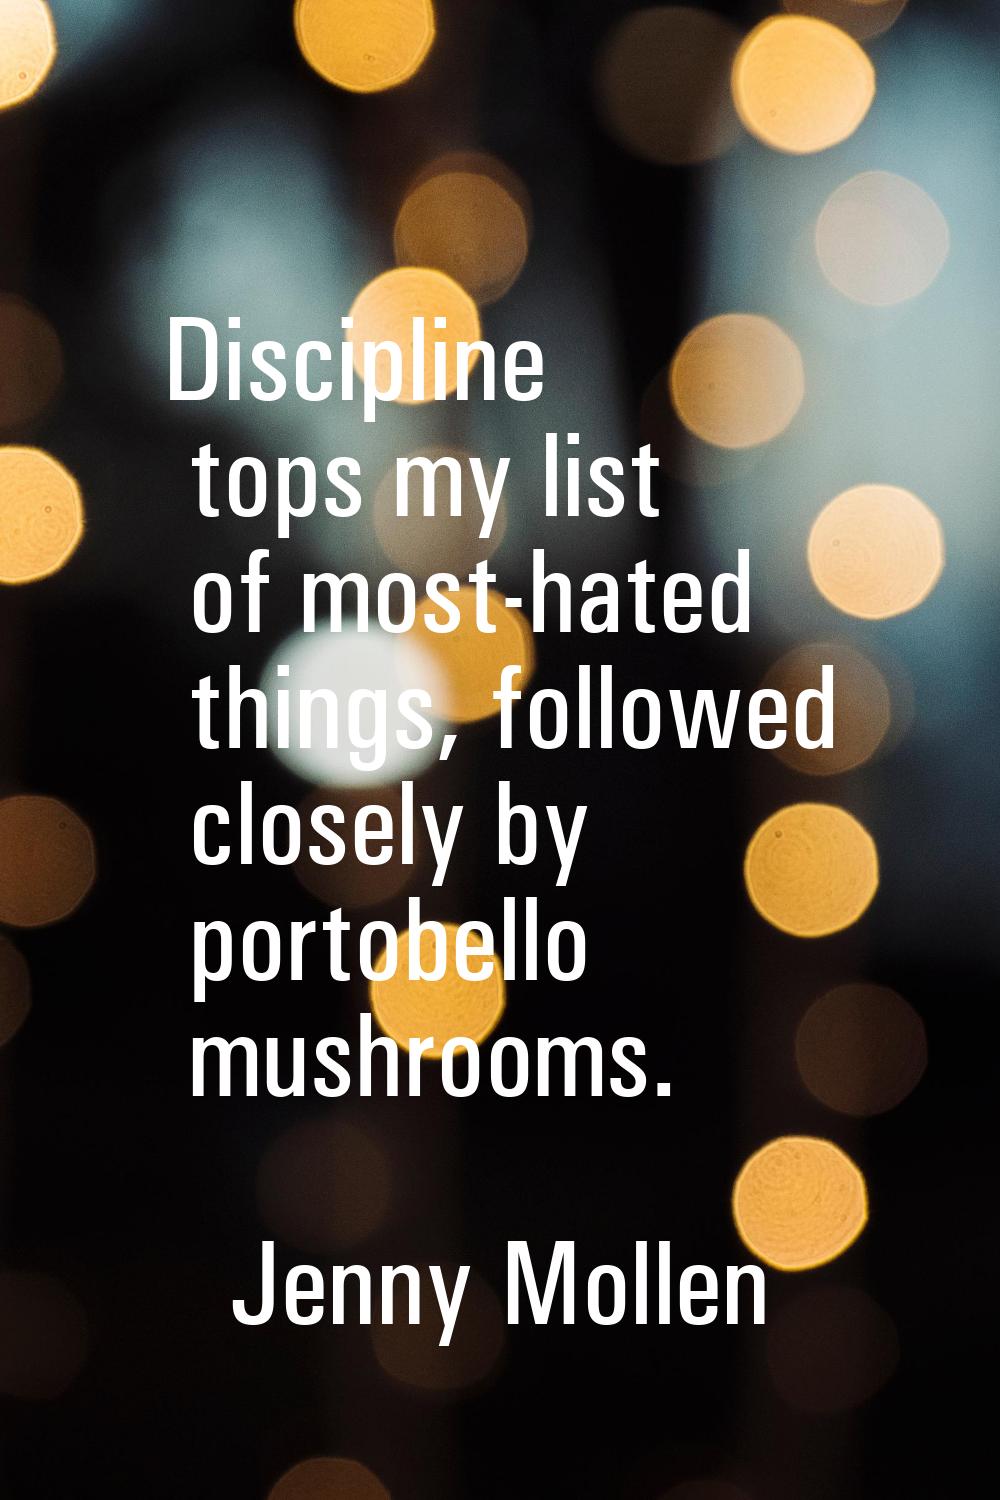 Discipline tops my list of most-hated things, followed closely by portobello mushrooms.